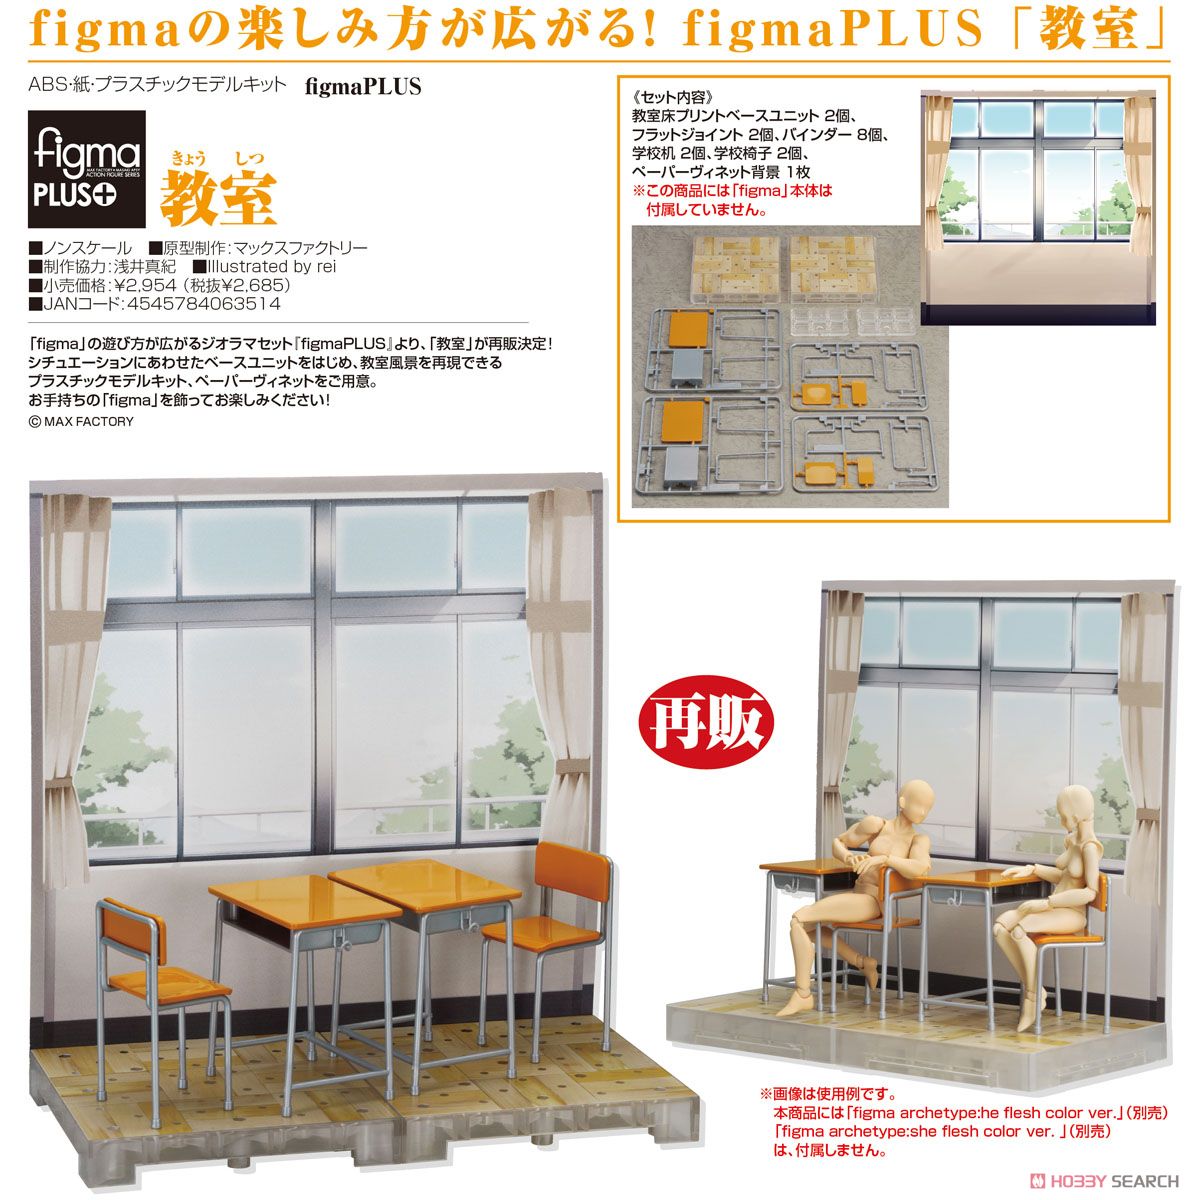 figmaPLUS 教室 (組立キット) 商品画像4